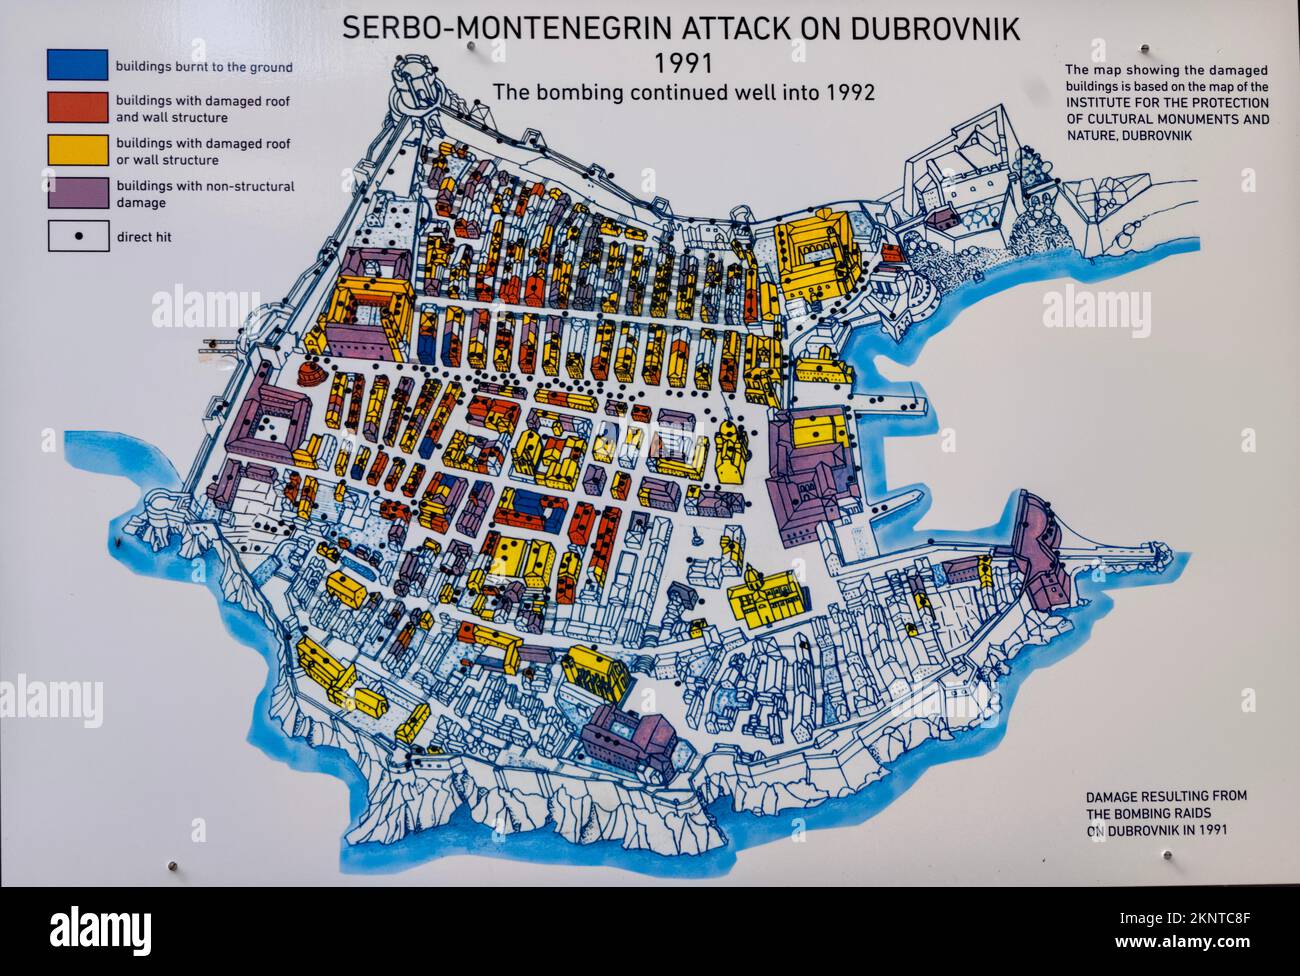 Dubrovnik, Croatia map showing damage from bombing raids on Dubrovnik in 1991 Serbo-Montenegrin Attack on Dubrovnik 1991 Stock Photo